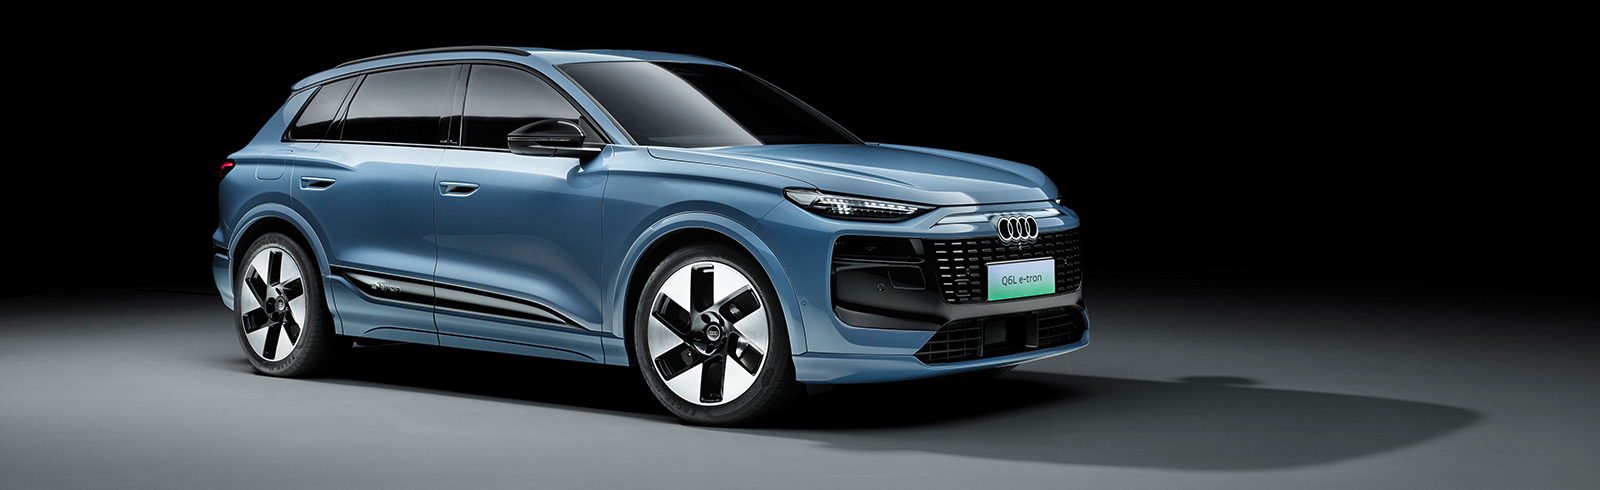 Audi Q6L e-tron for China is fully unveiled